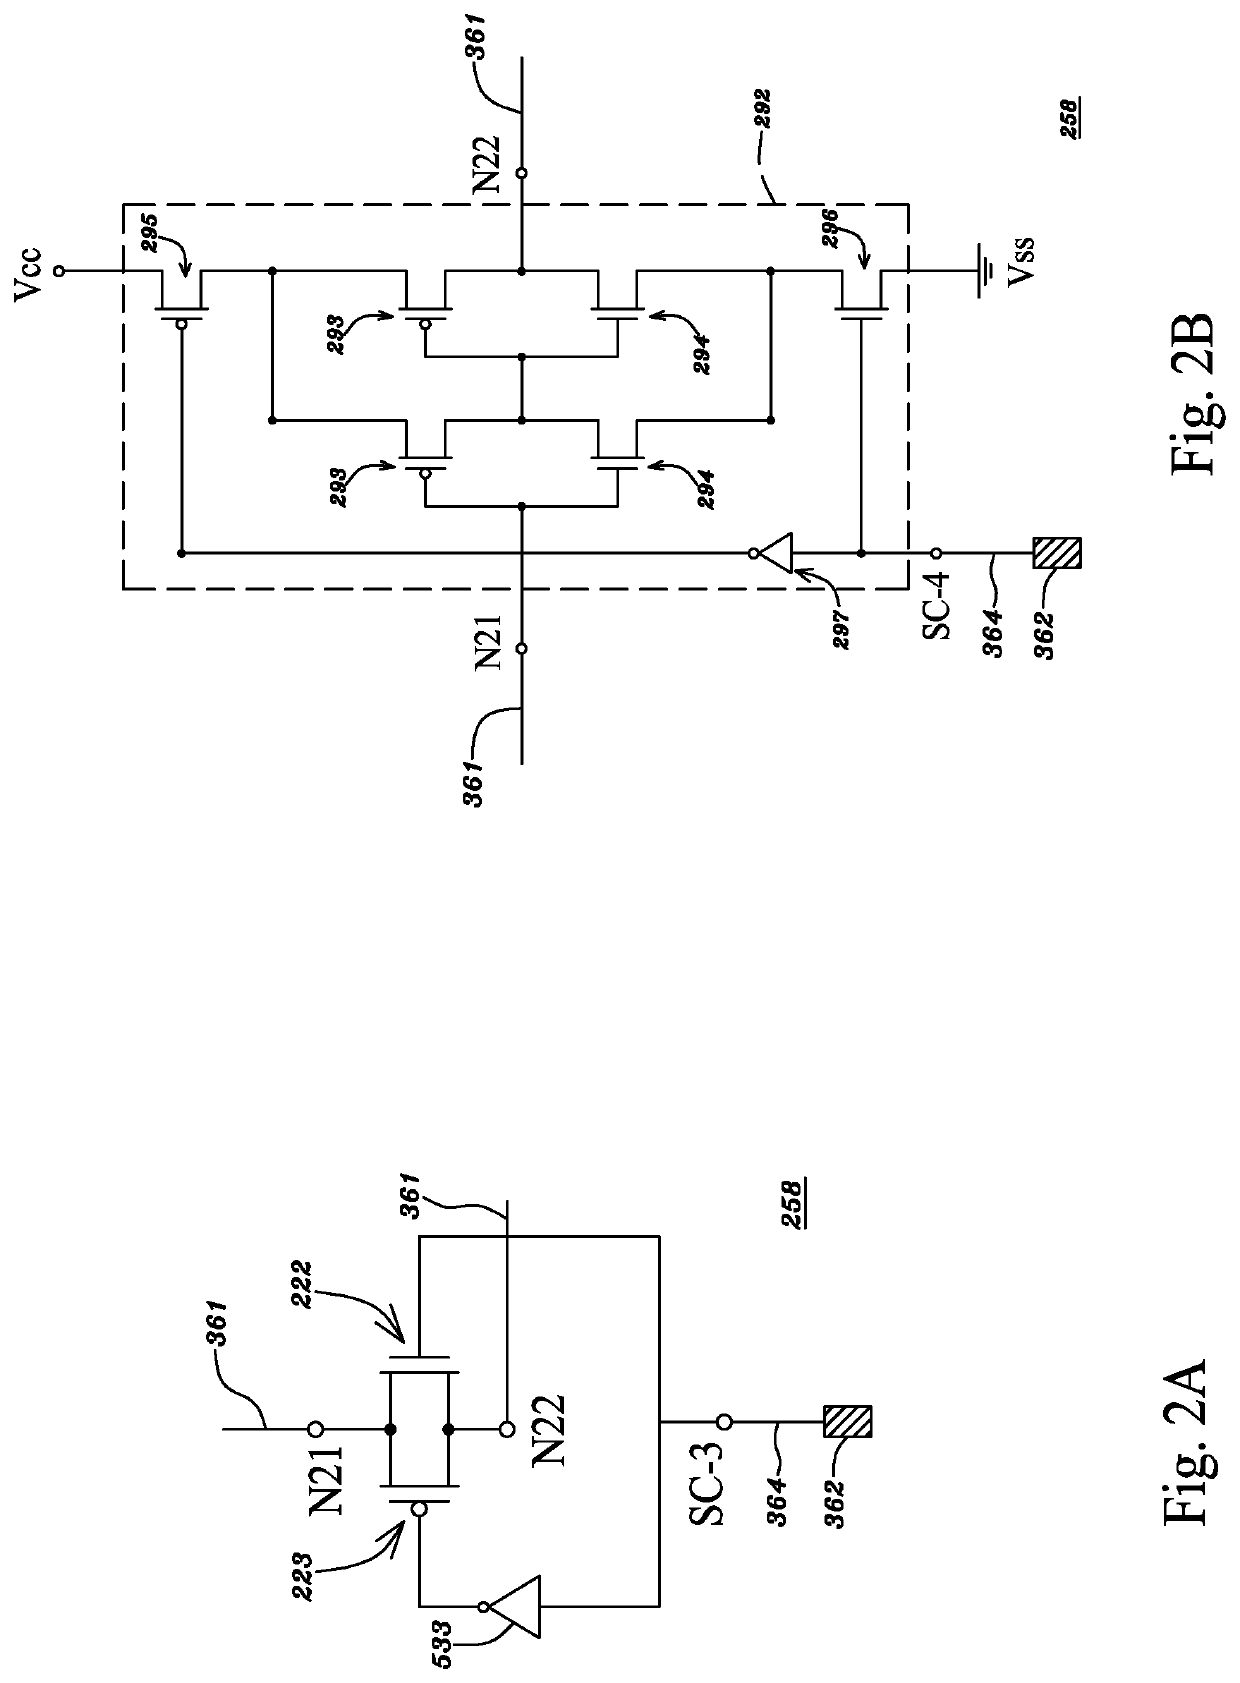 Logic drive based on chip scale package comprising standardized commodity programmable logic IC chip and memory IC chip